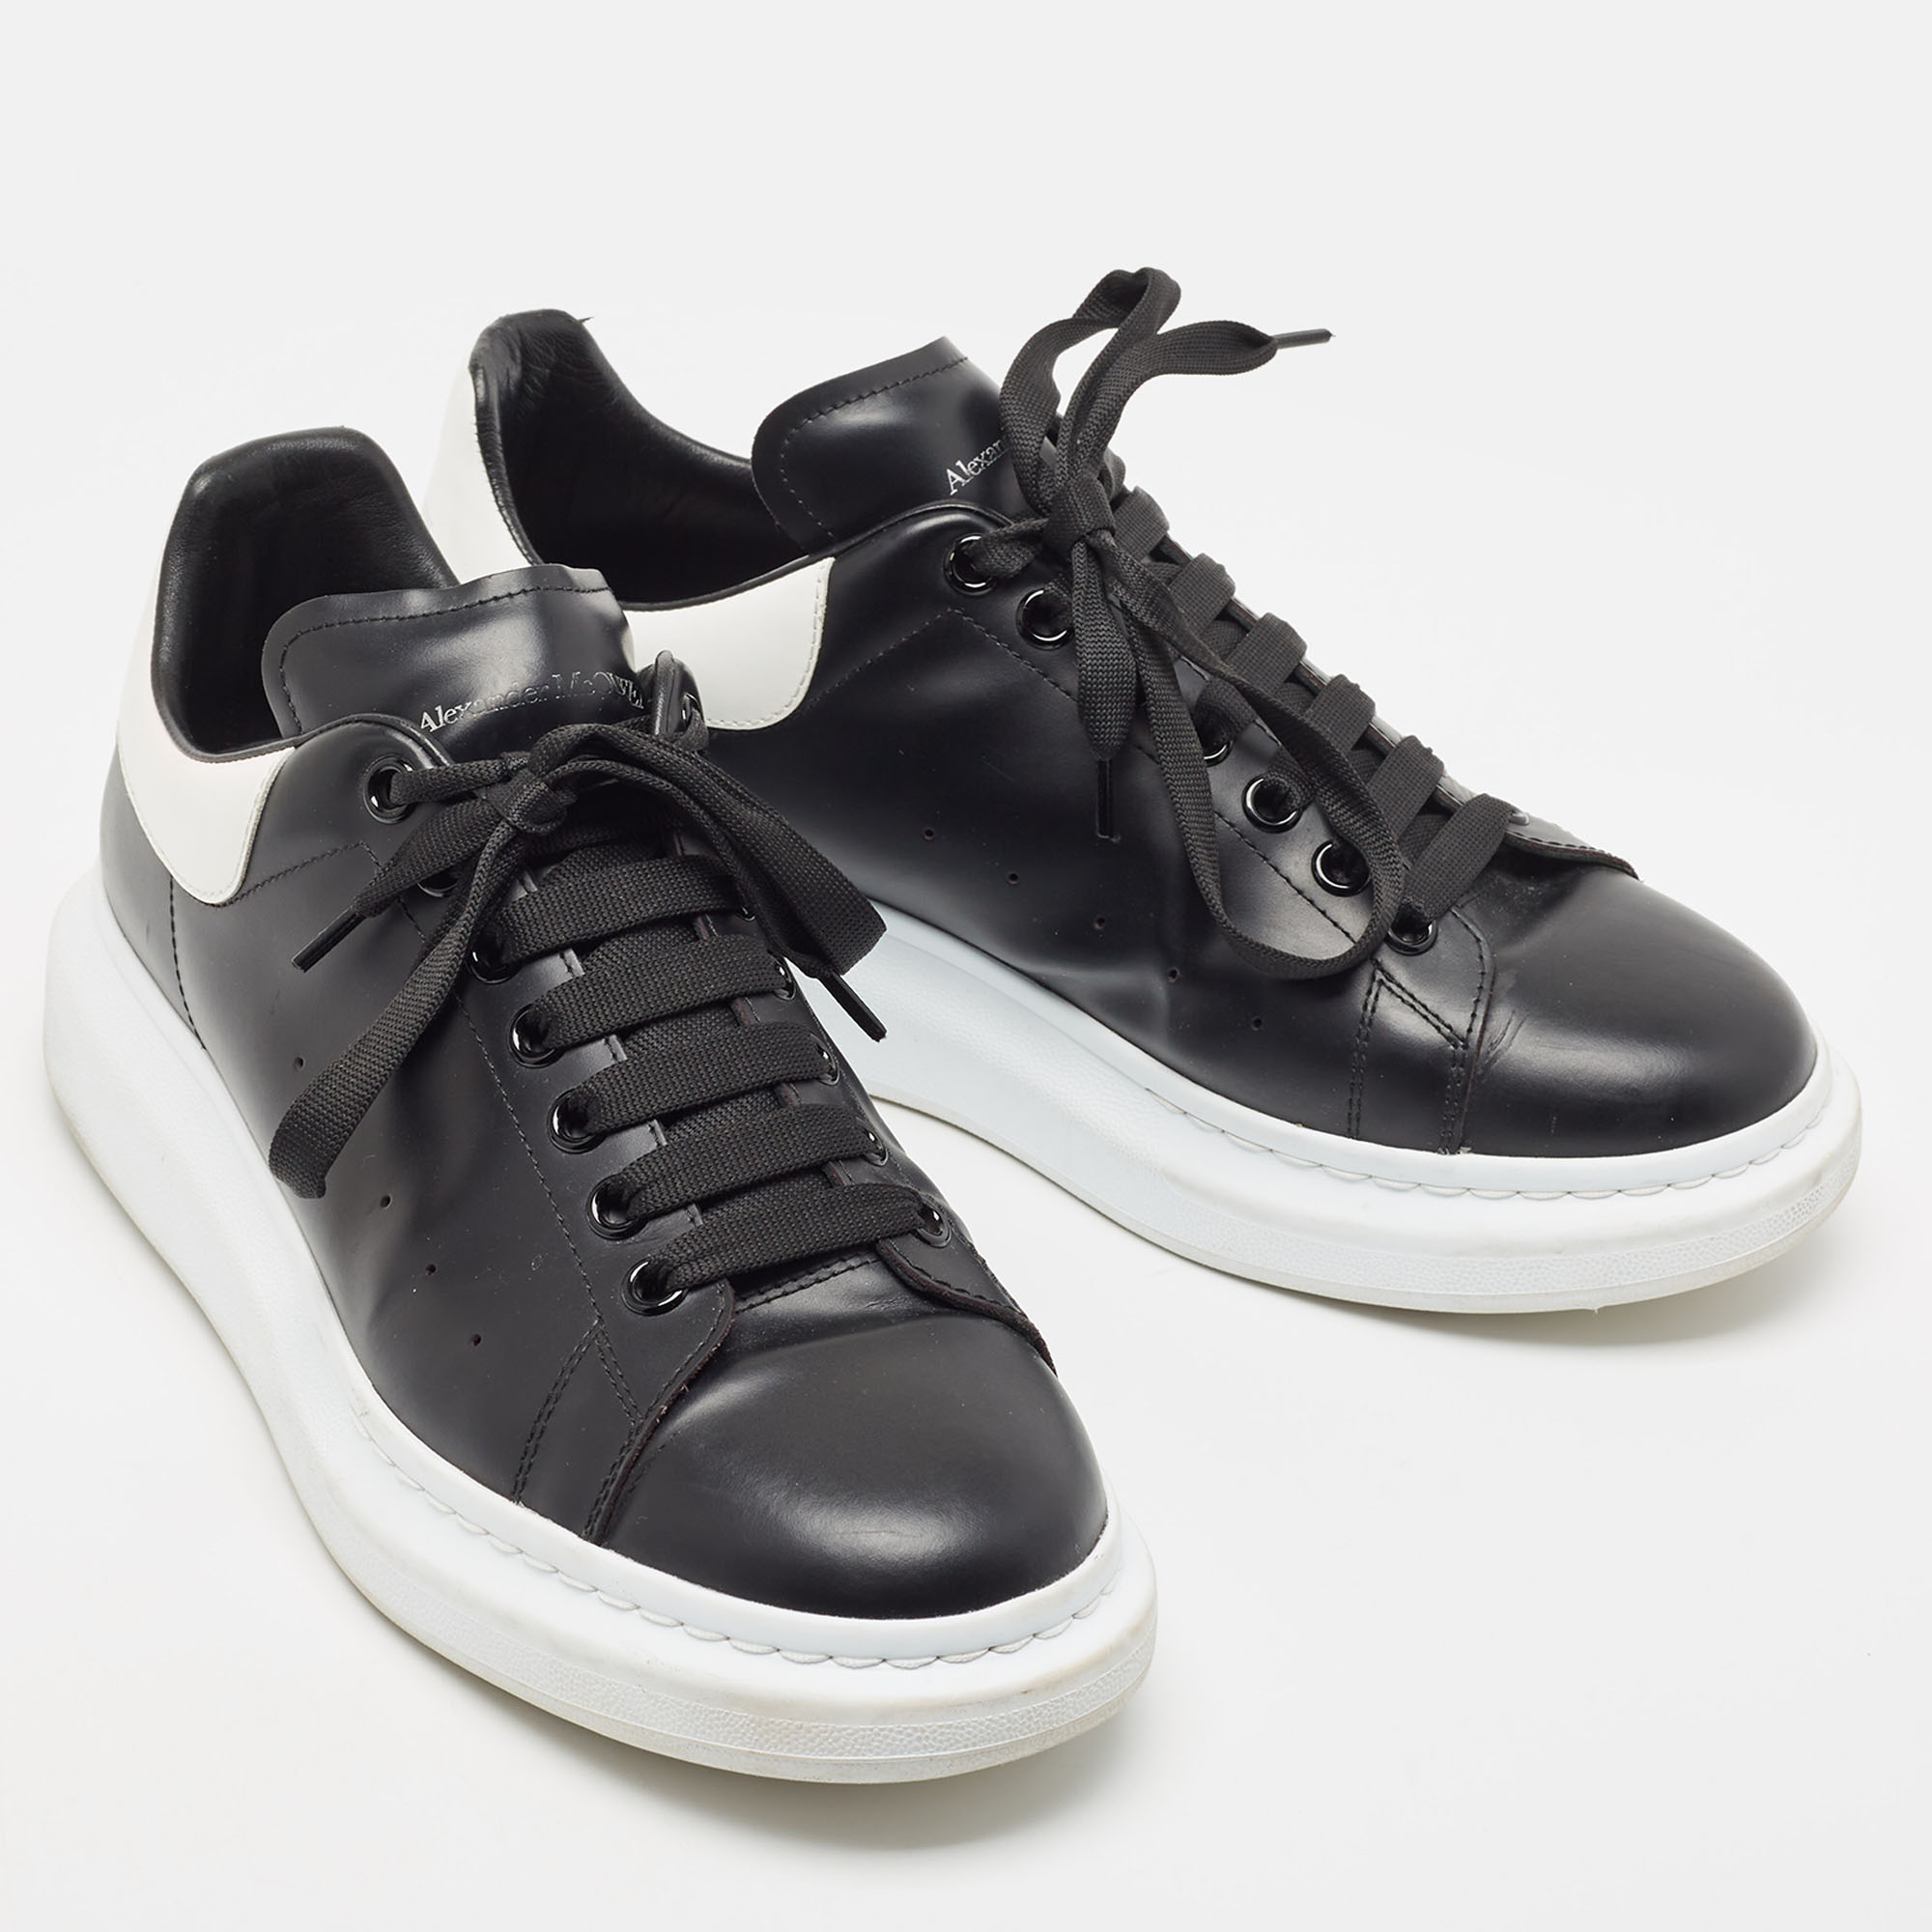 Alexander McQueen Black/White Leather Oversized Sneakers Size 44